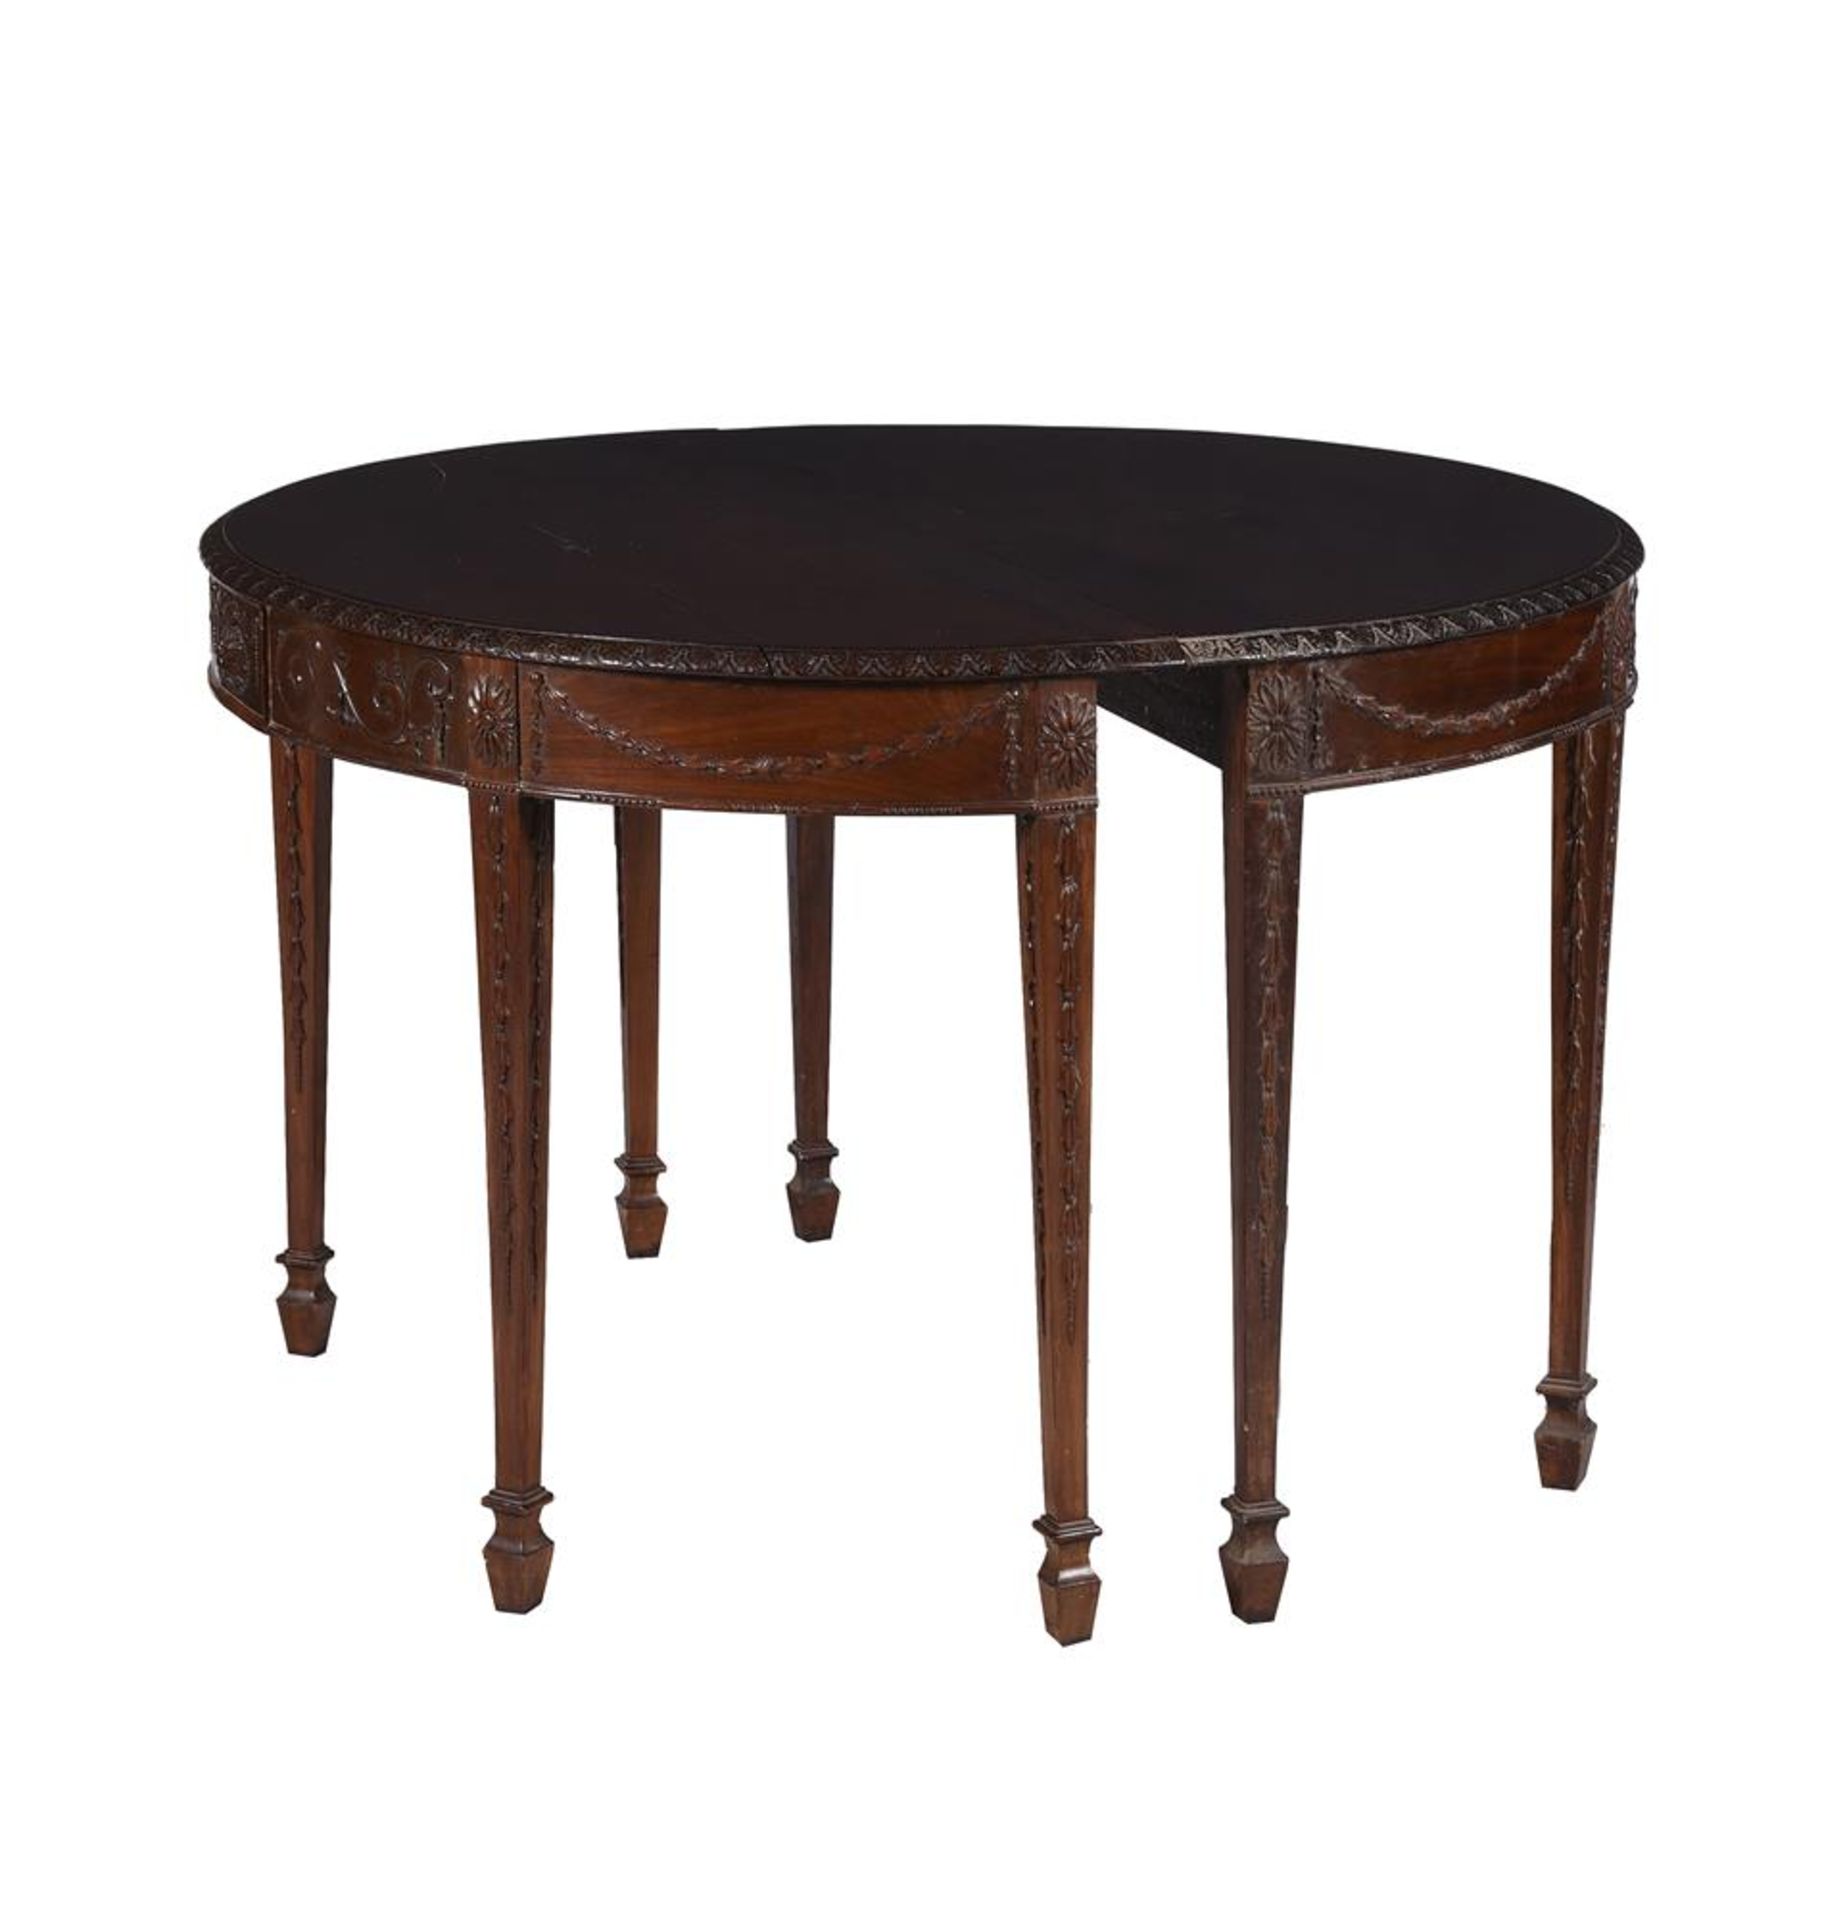 A MAHOGANY D END DINING TABLE IN GEORGE III ADAM STYLE - Image 2 of 4